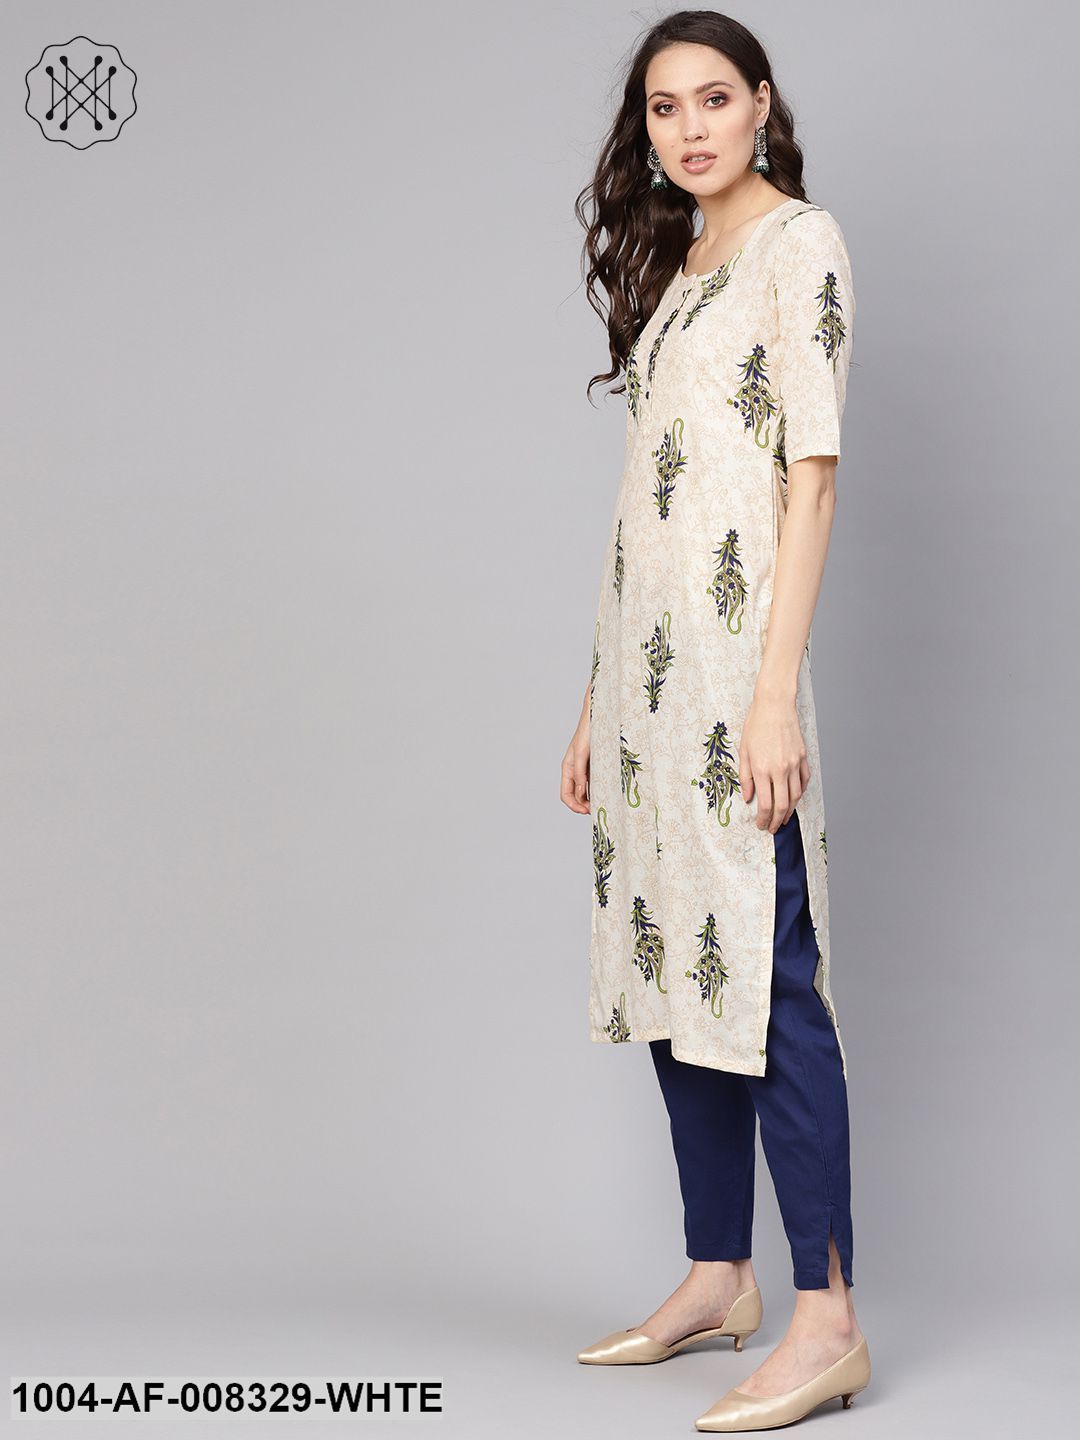 Which pants go better with a Kurti? - Quora